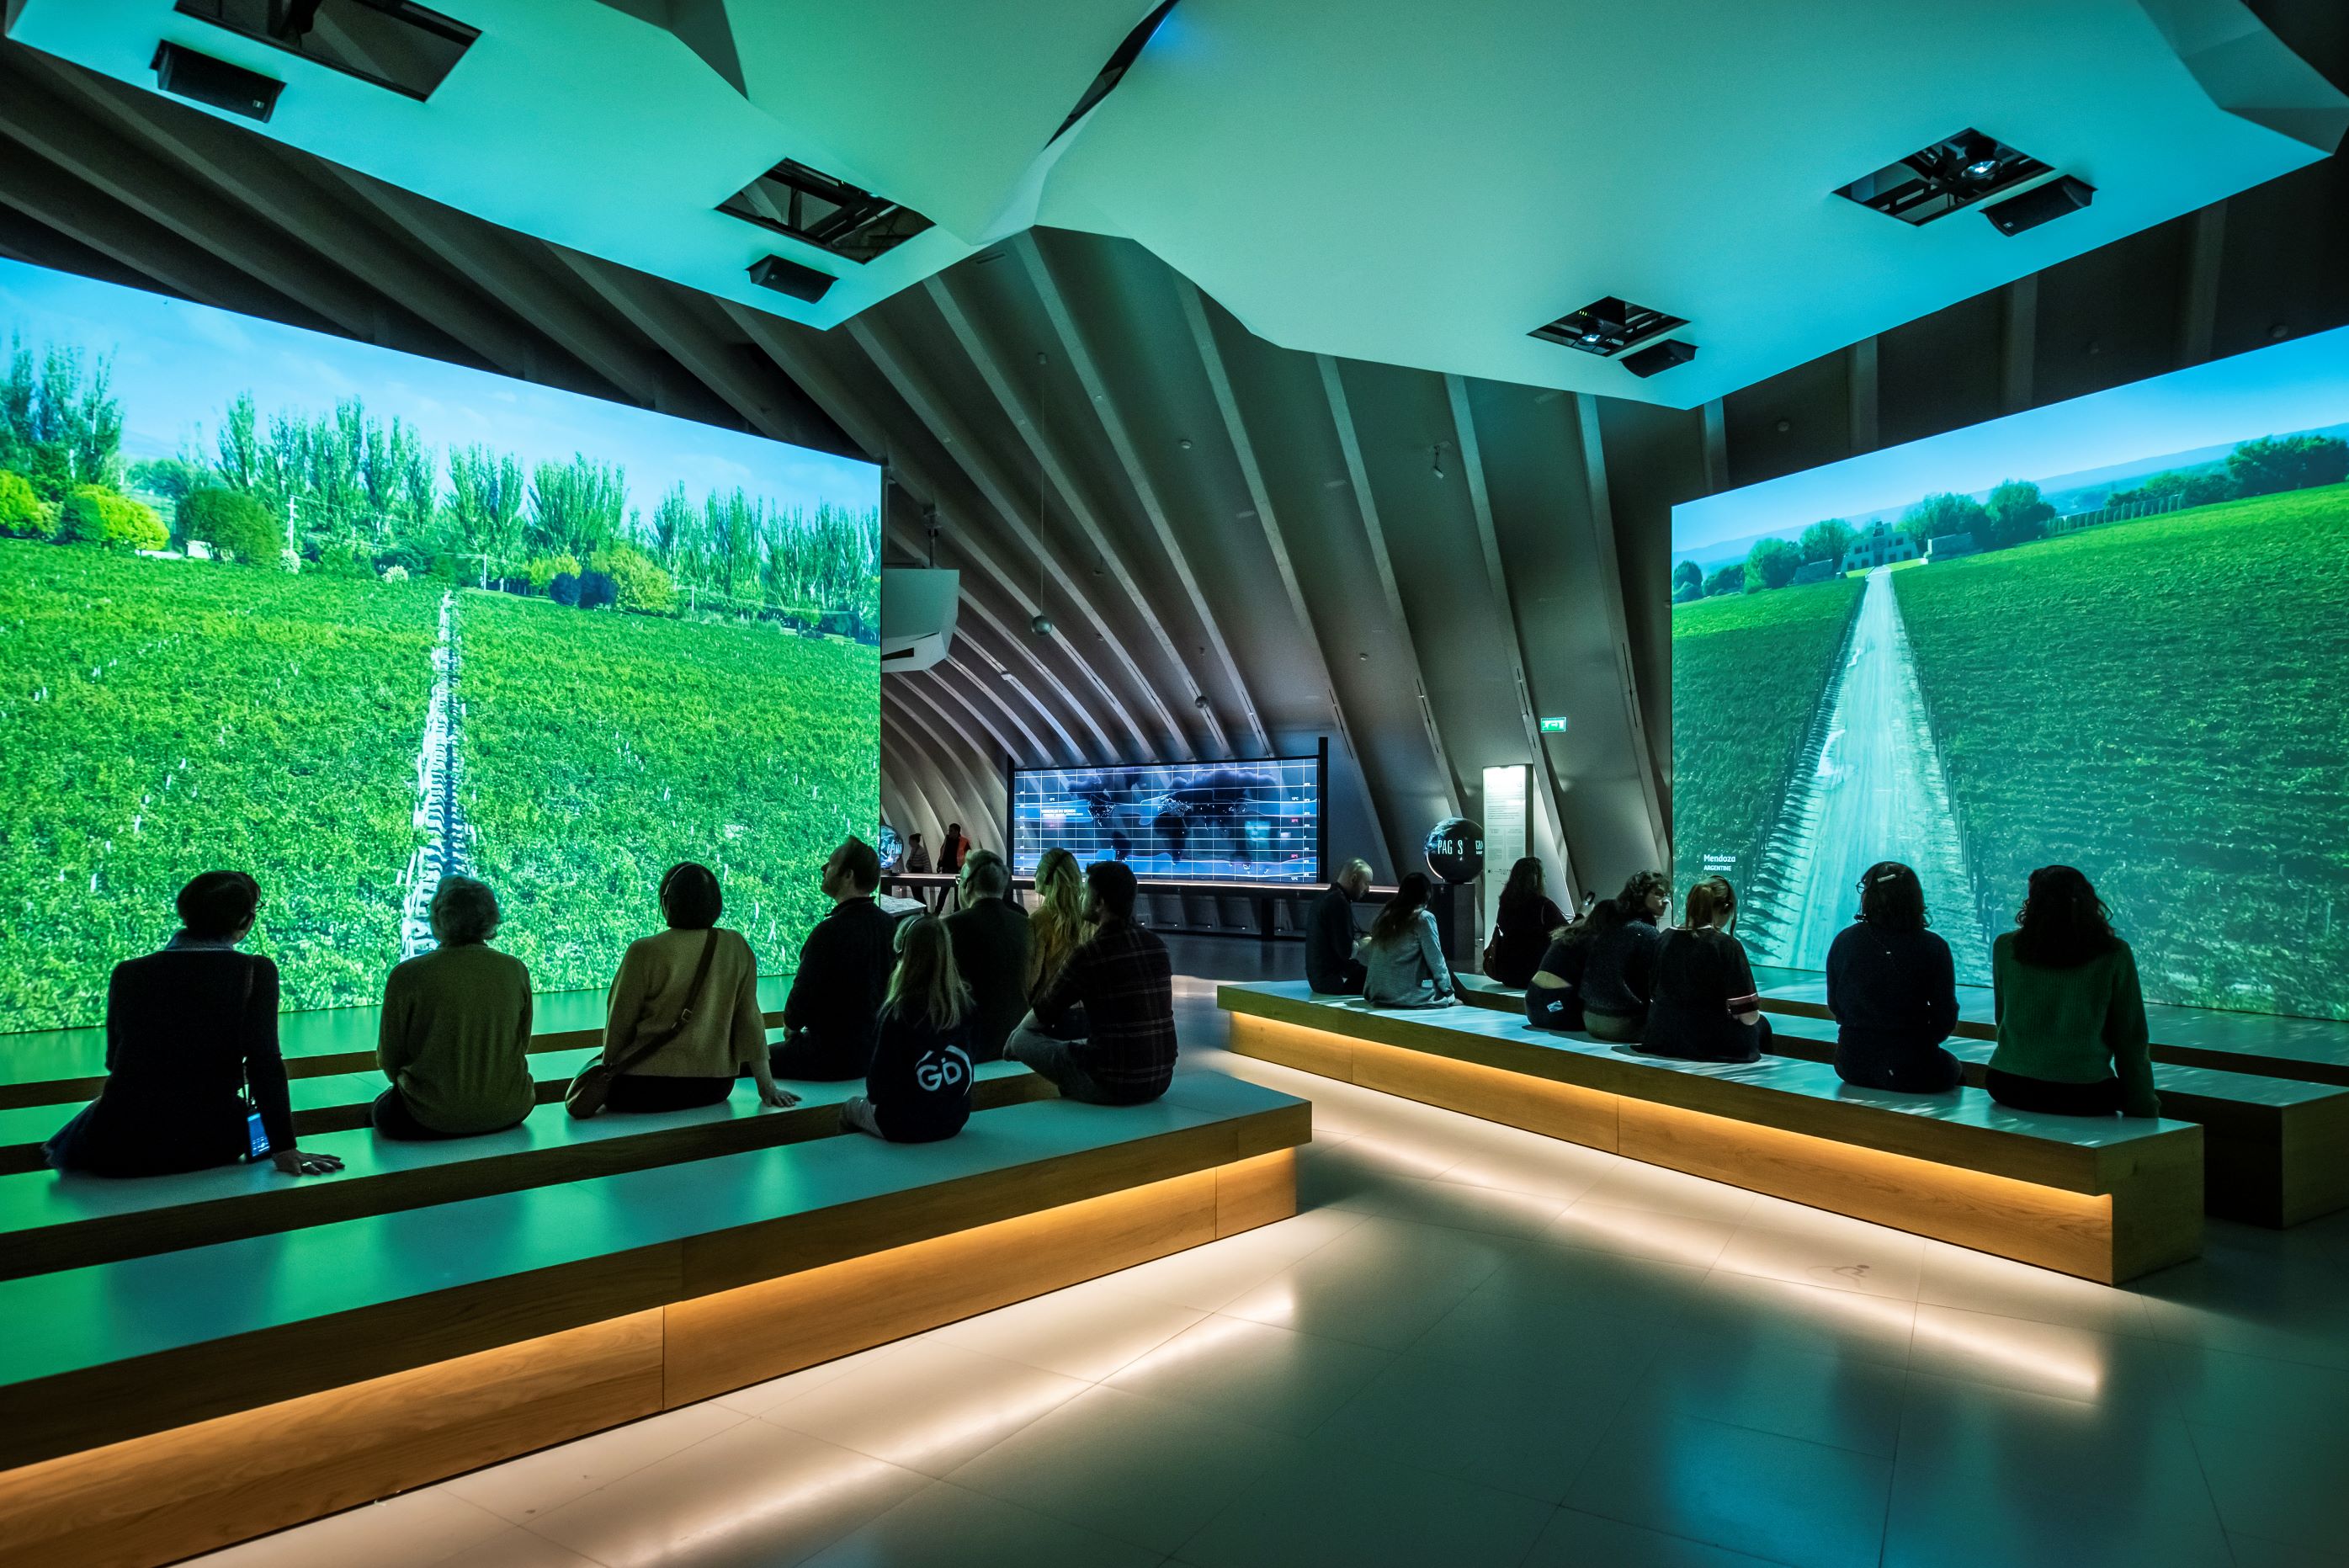 Behind the scenes at the world's most famous wine museum